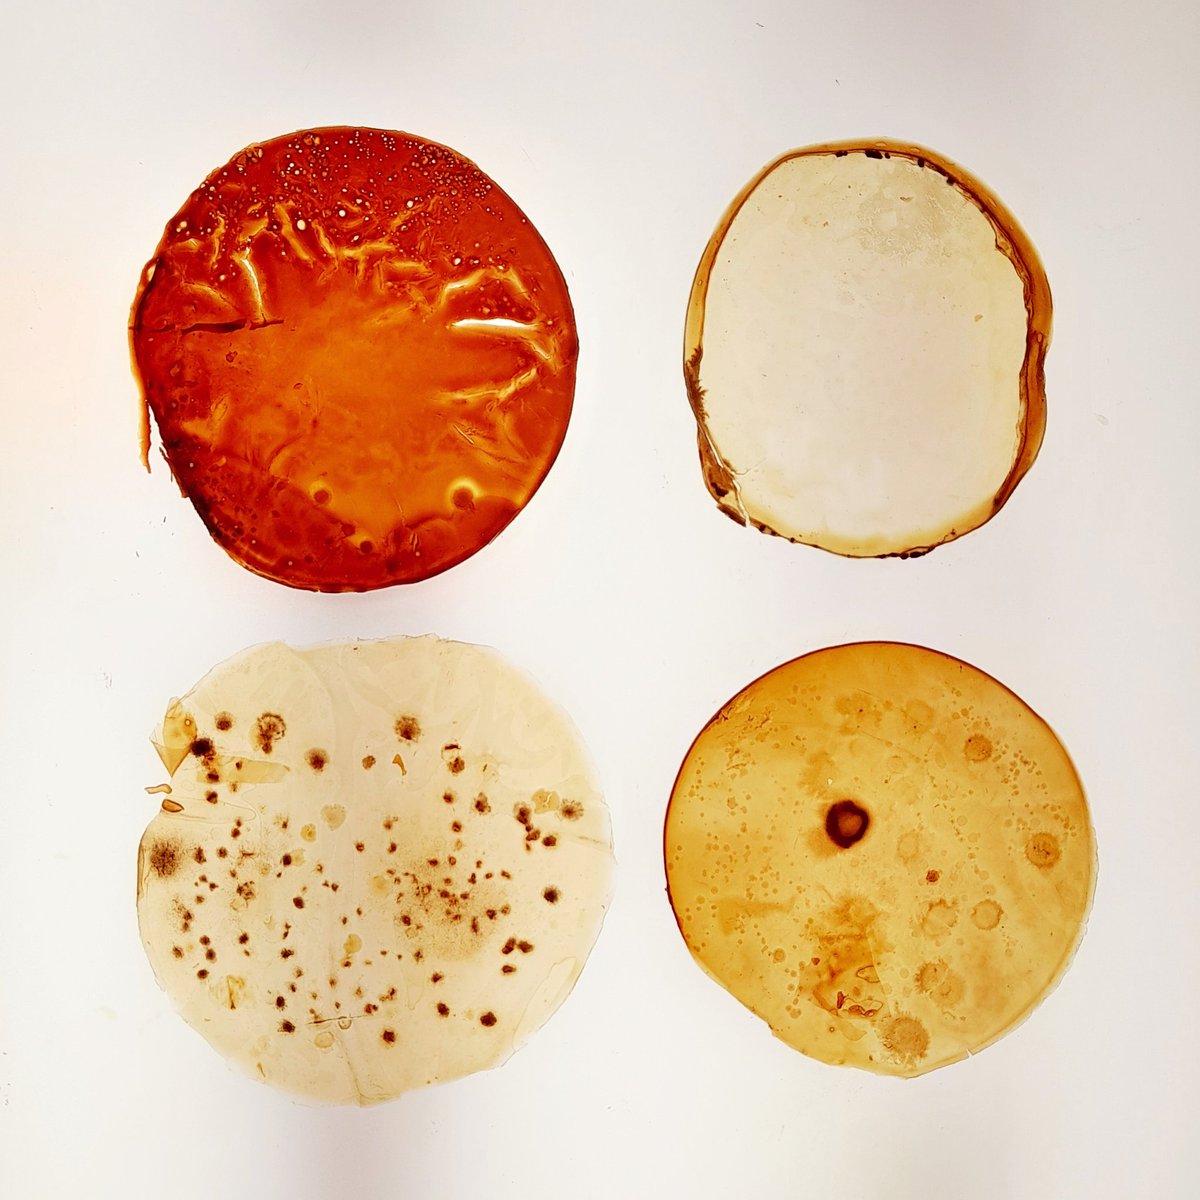 We've been doing a bit of a clean out of old petri dishes from microbes-gone-past. The nutrient agar has long dried out and after sterilising the dishes we're left with disks of fragile bioplastic🧫 #ASCUSLab #biomaterials #biodesign #microorganisms #microbiology #sustainability